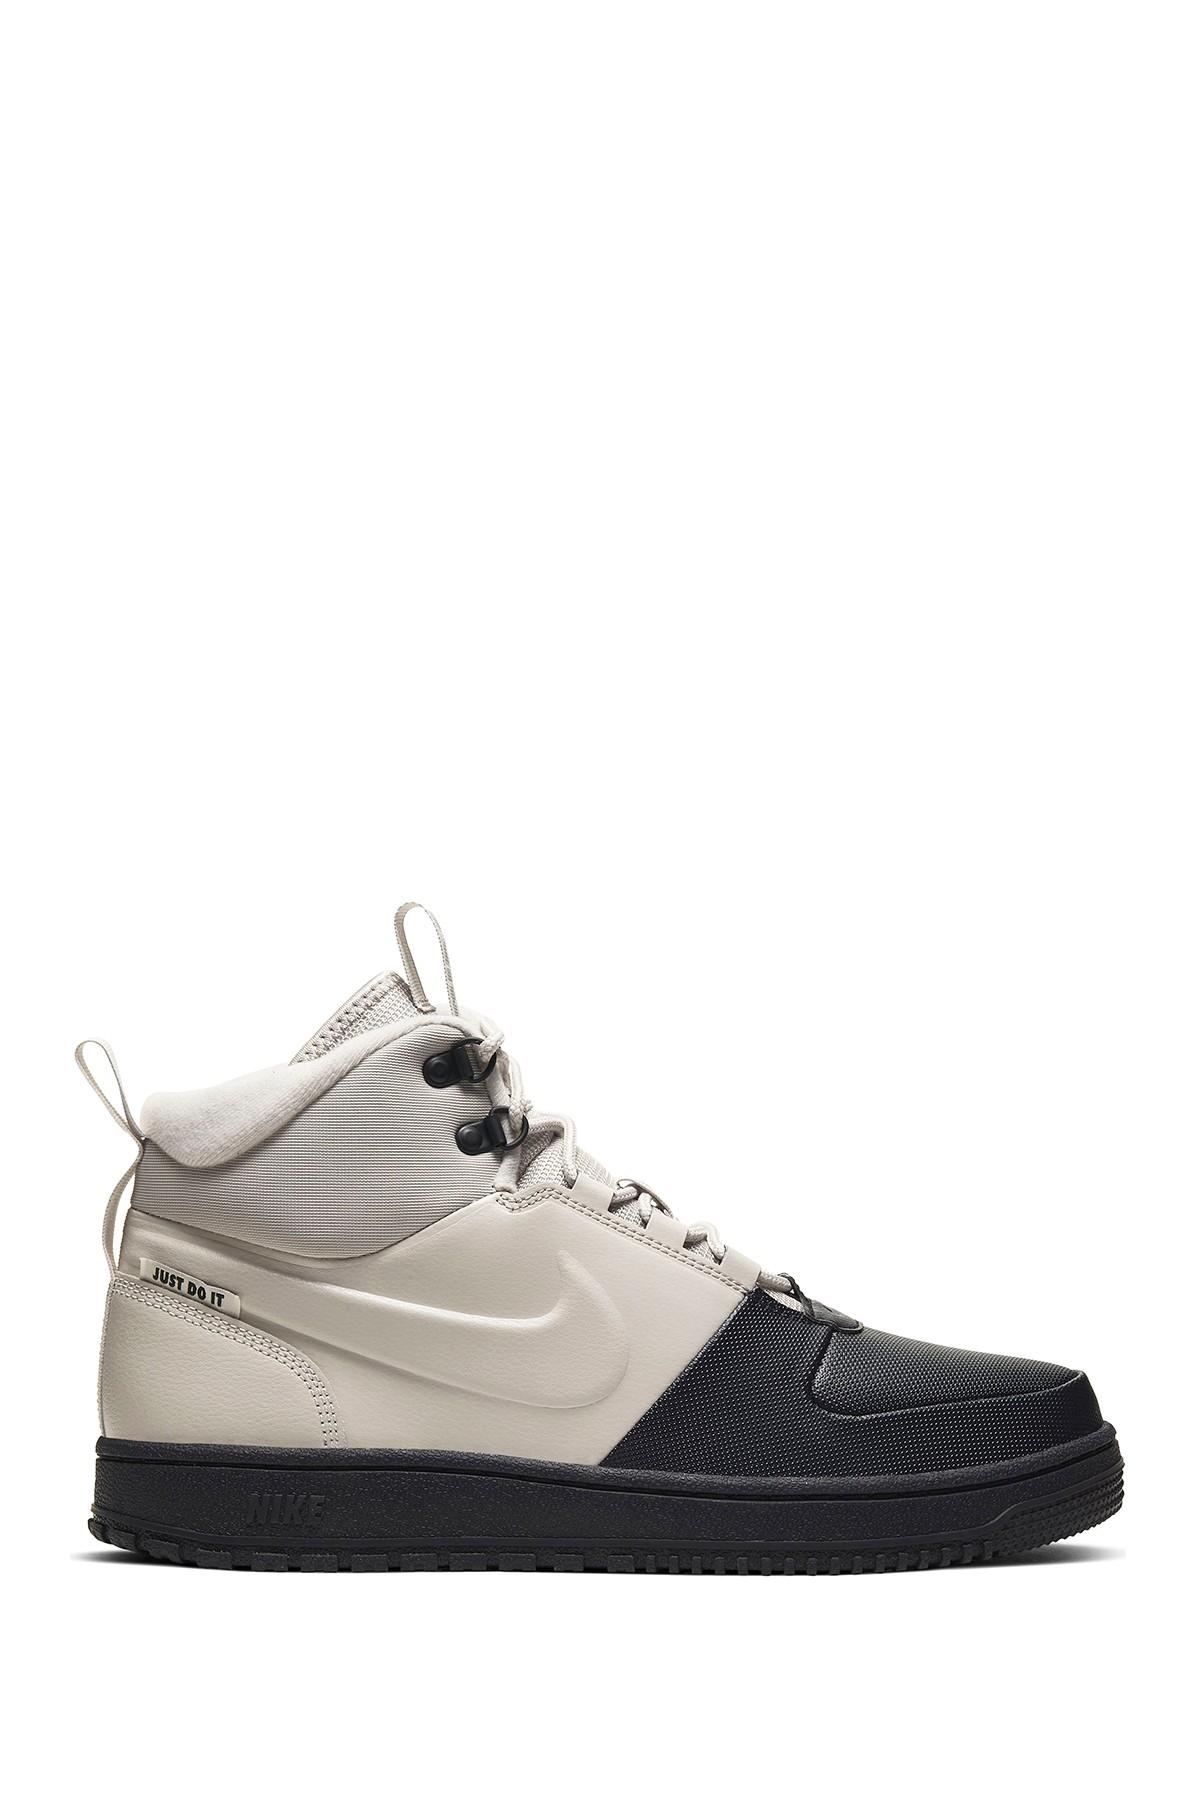 Nike Synthetic Court Royale Ac High Top Basketball Sneaker for Men - Lyst